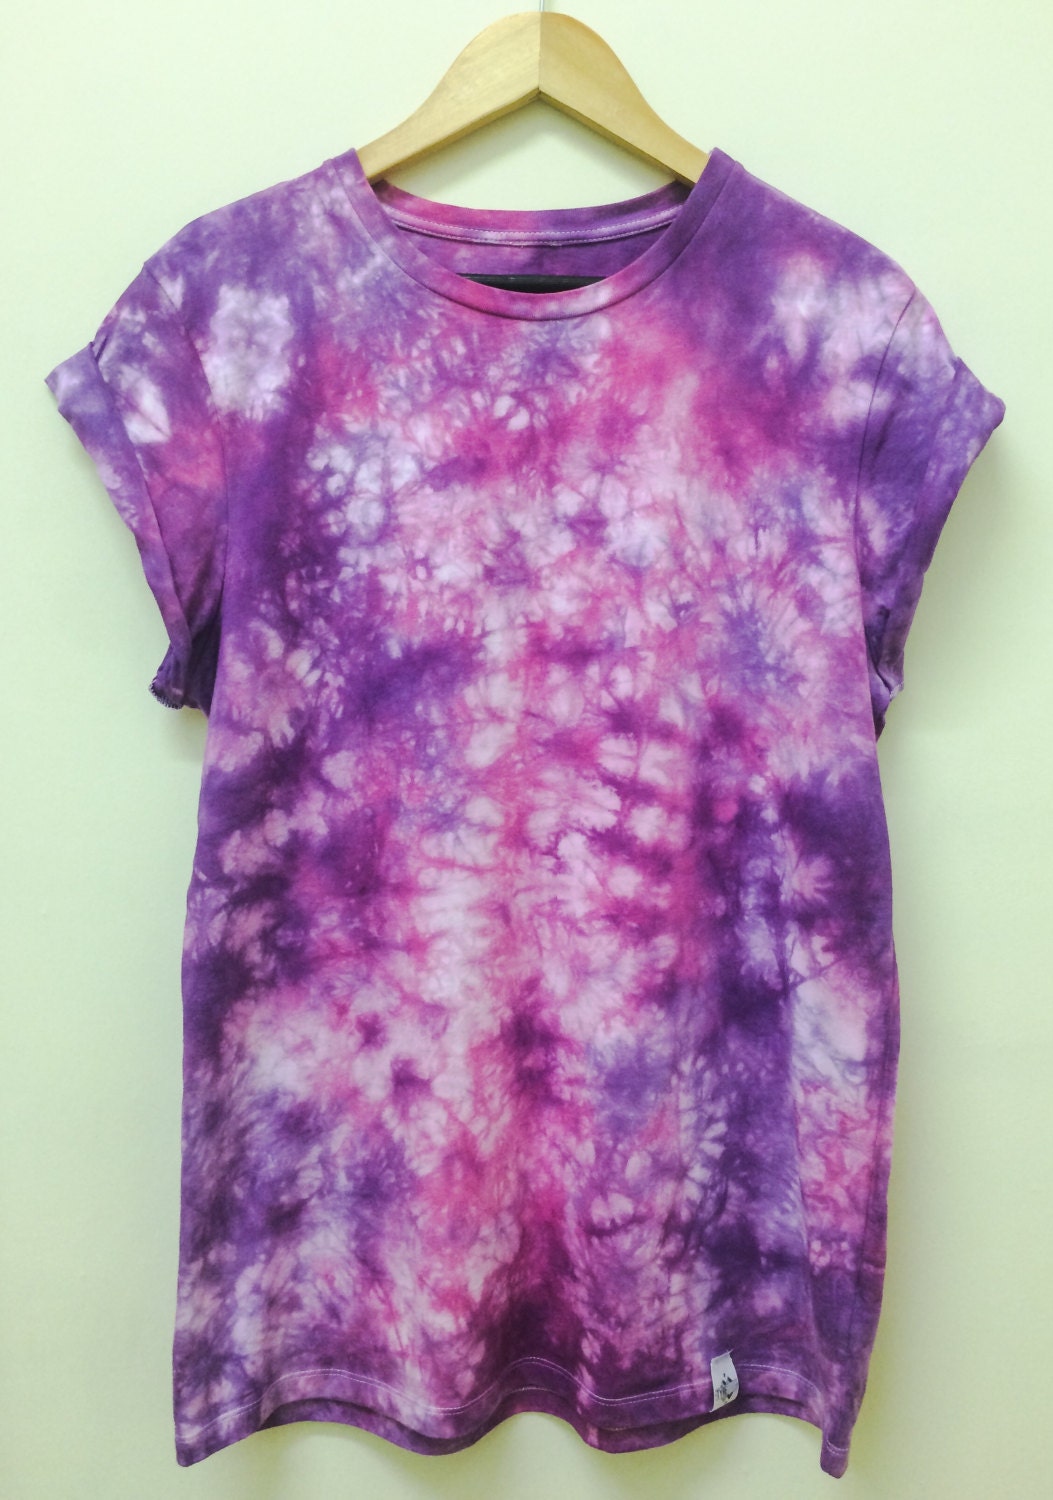 Marble Tie Dye T-Shirt Purple/Pink/White by TyreDyes on Etsy